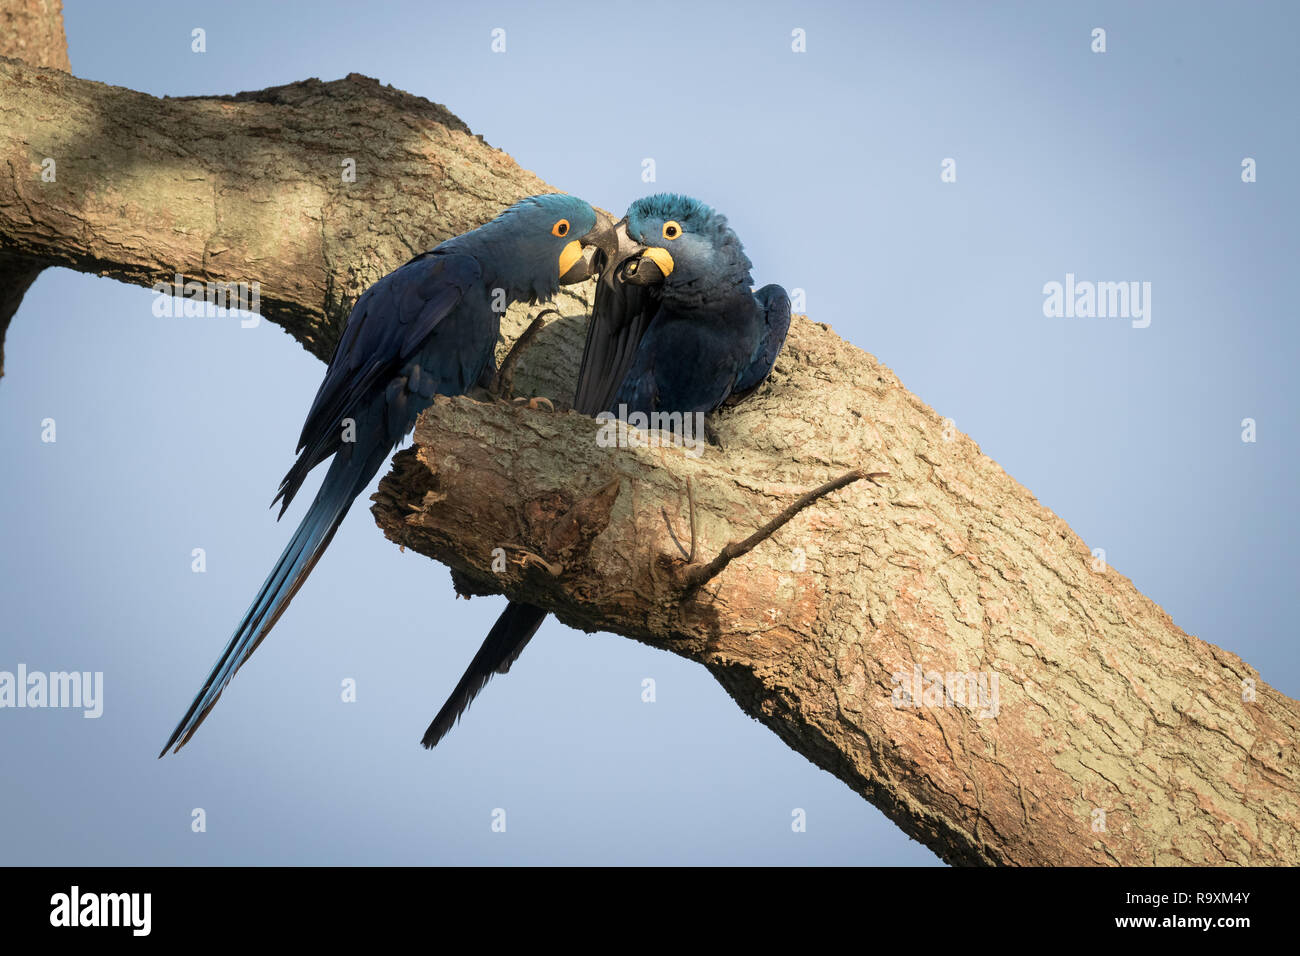 Blue Macaw in Pantanal Stock Photo